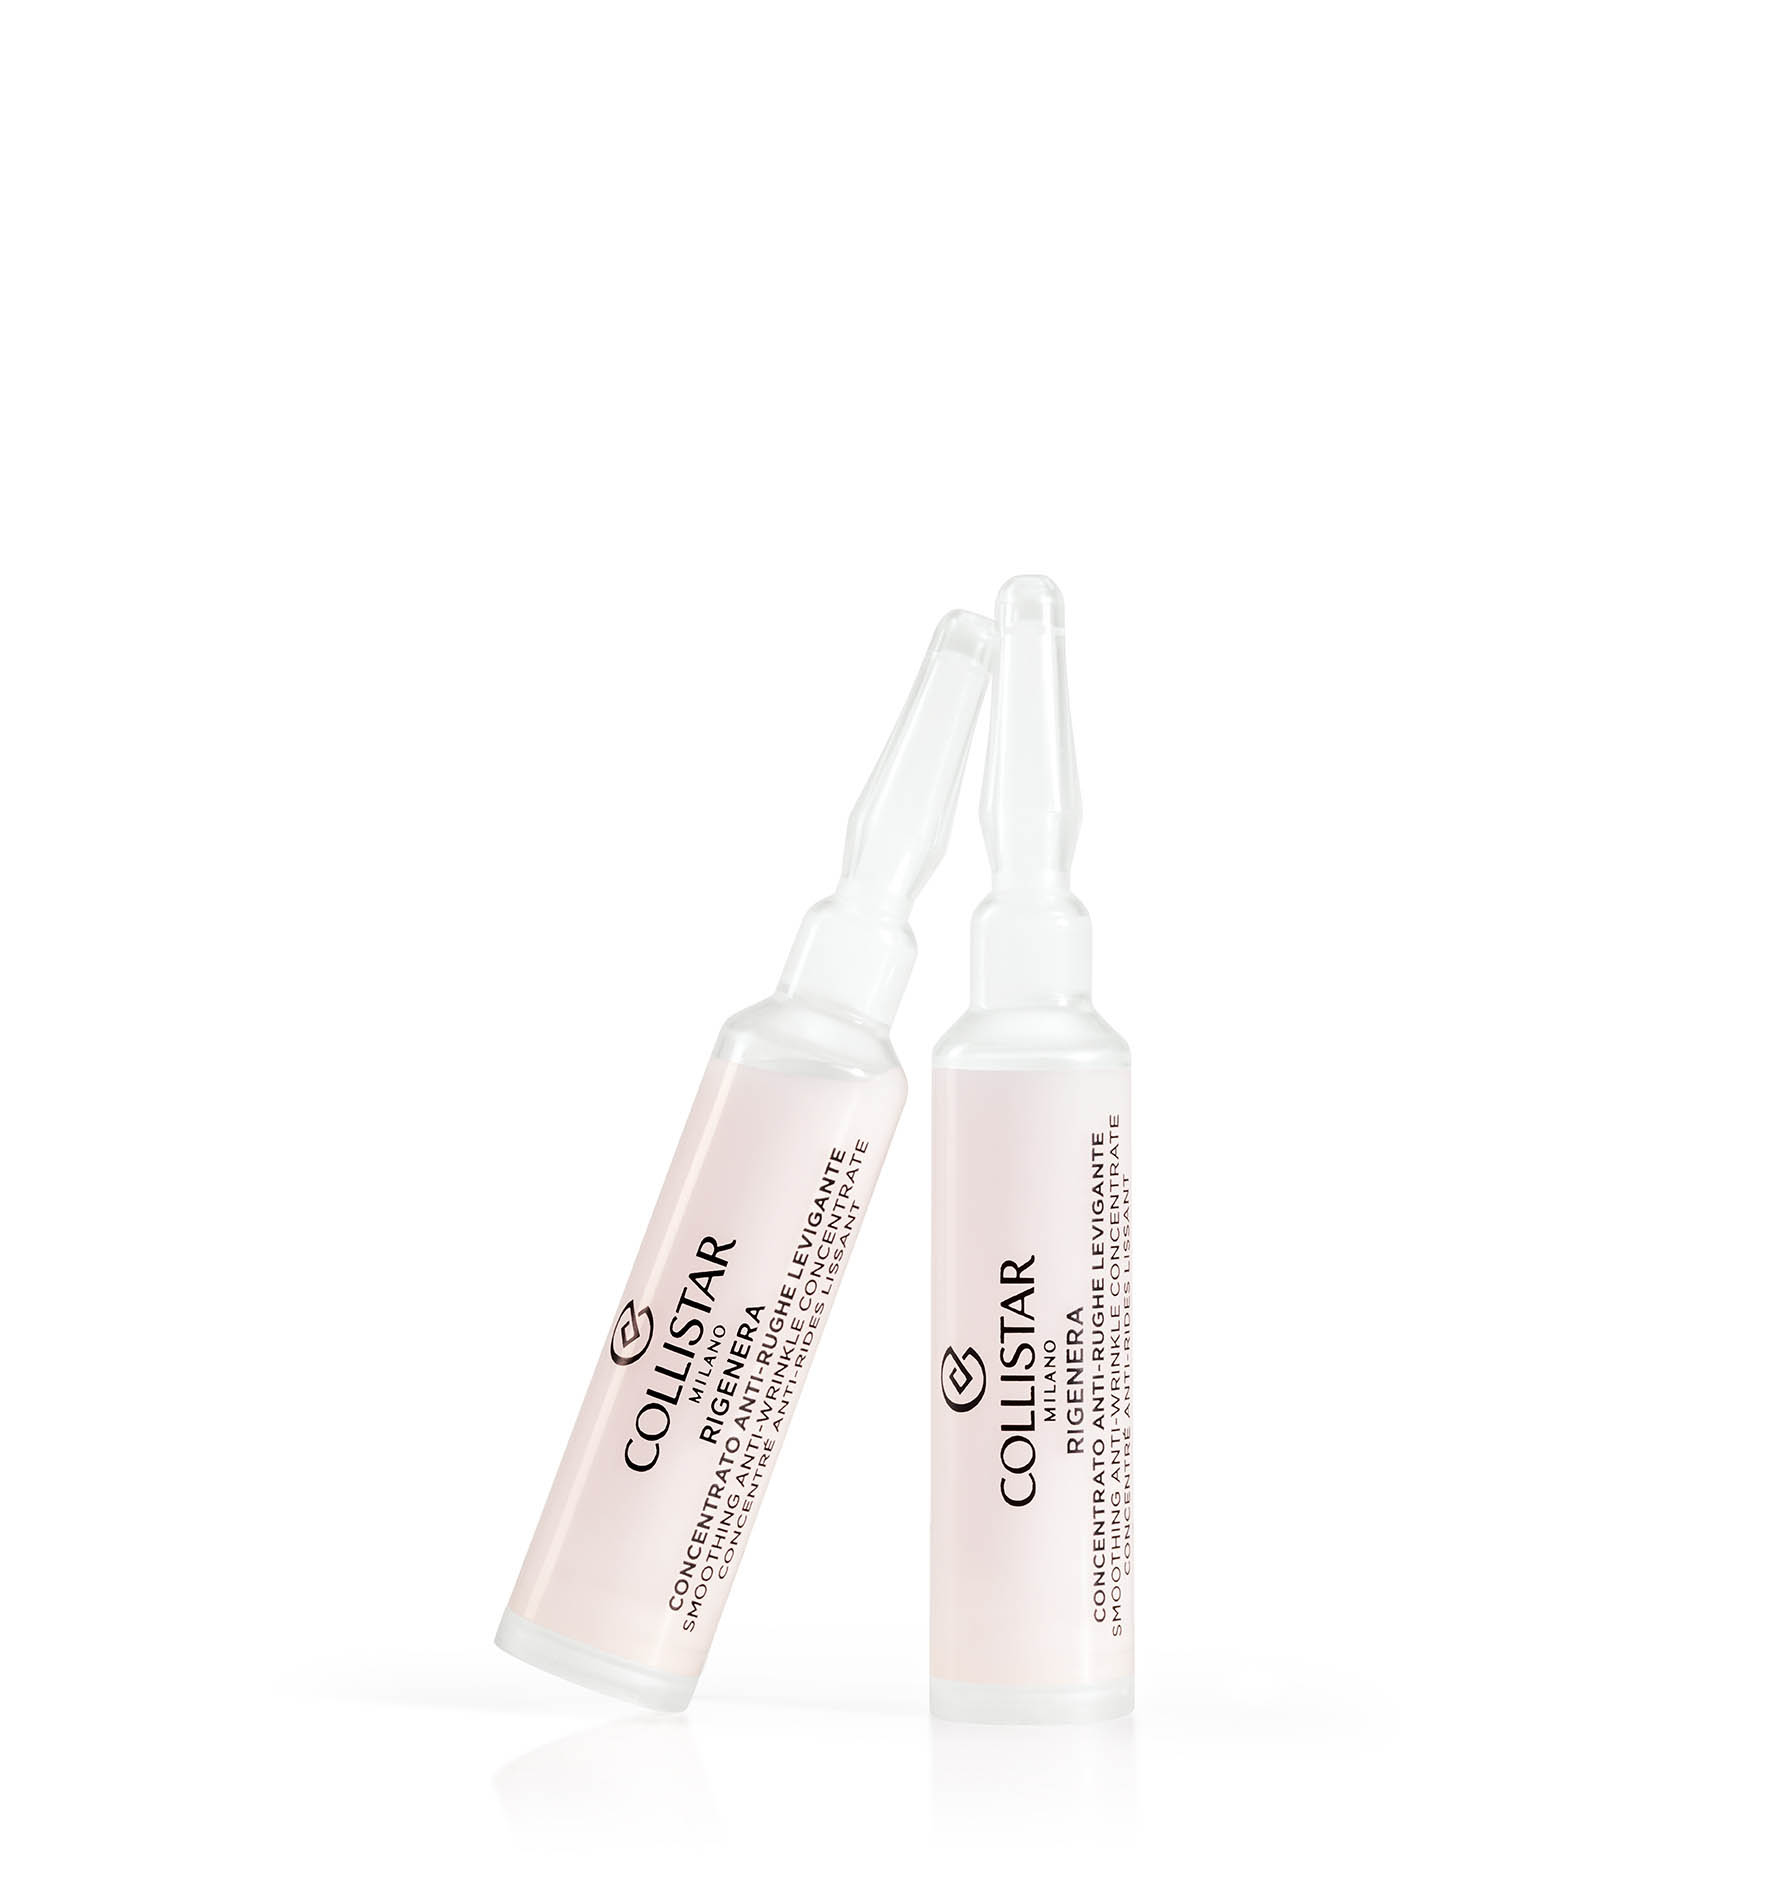 RIGENERA SMOOTHING ANTI-WRINKLE CONCENTRATE - Wrinkles | Collistar - Shop Online Ufficiale